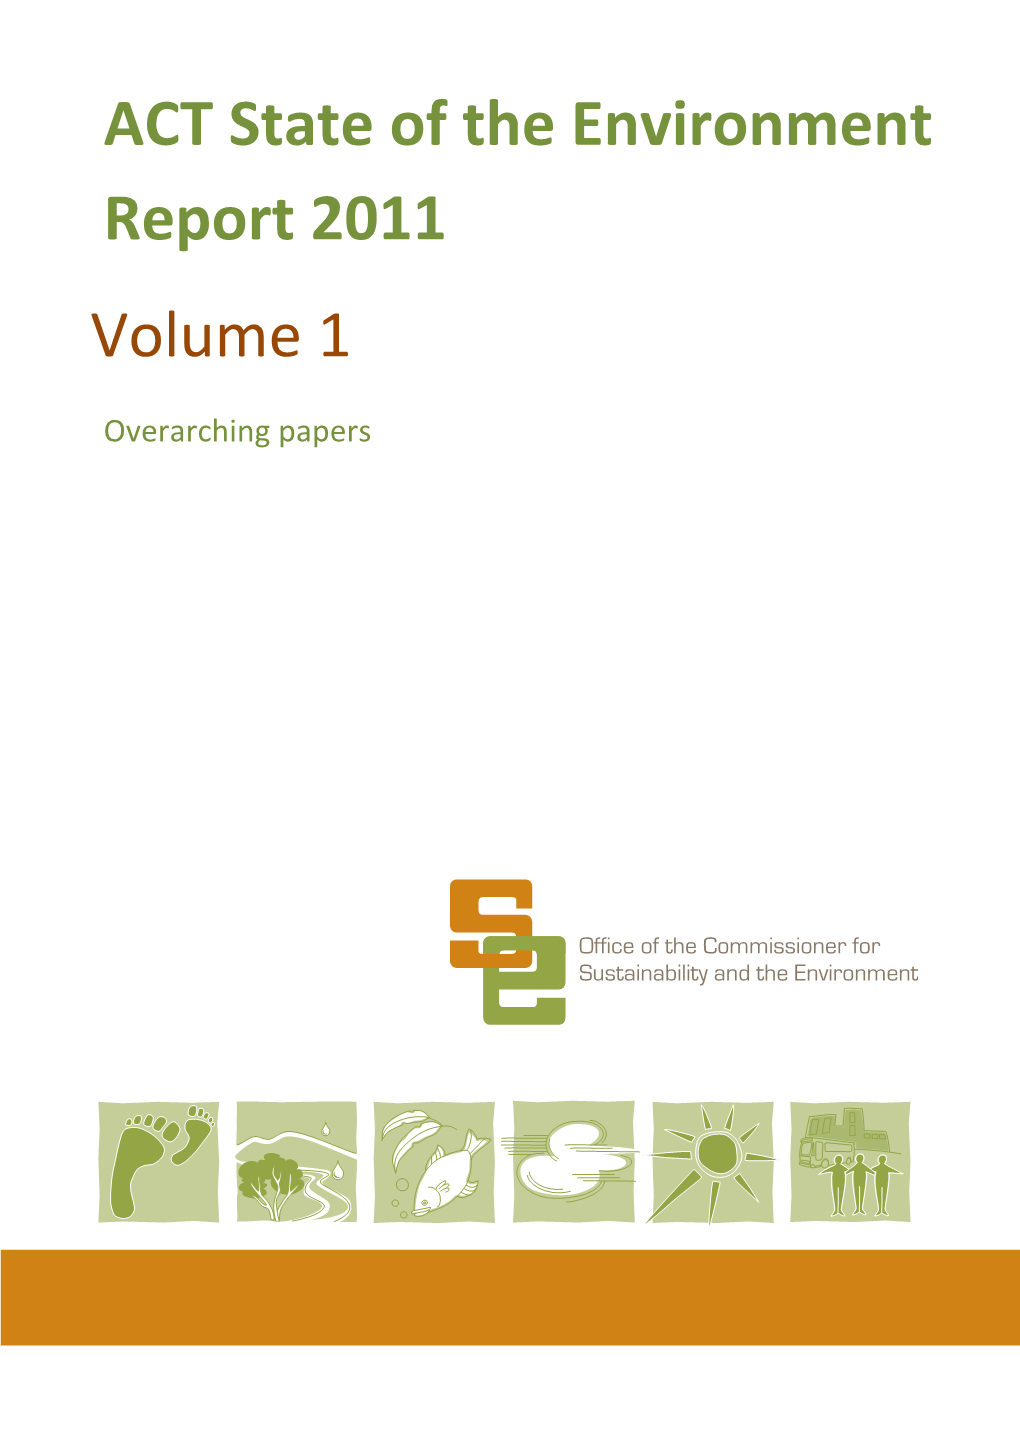 ACT State of the Environment Report 2011 Volume 1